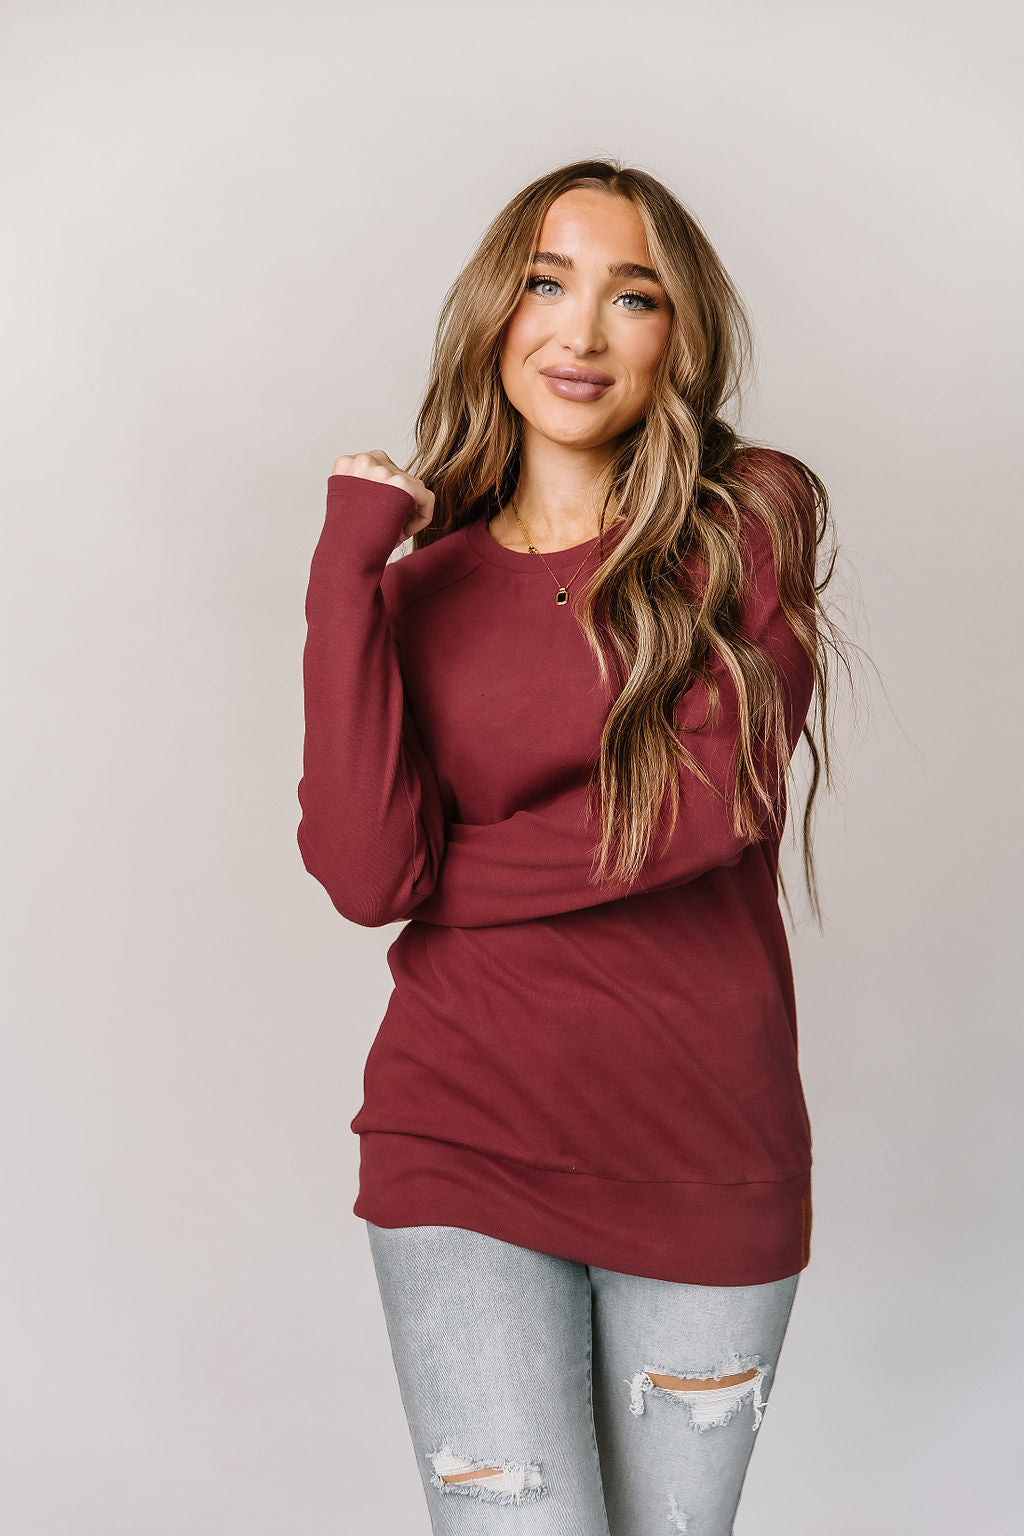 Ampersand Avenue Classic Pullover - Cranberry